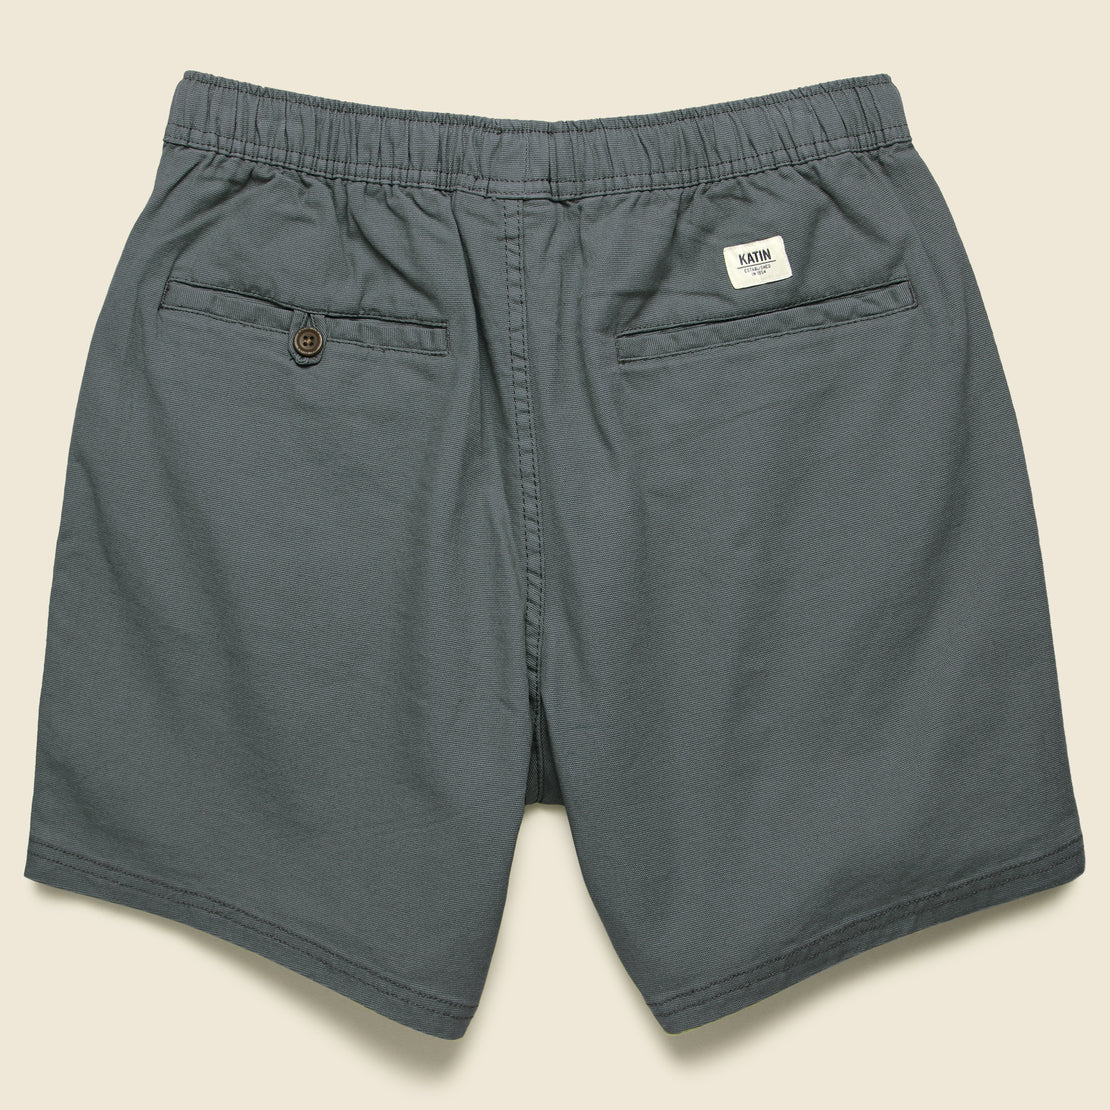 Trails Short - Soot - Katin - STAG Provisions - Shorts - Lounge